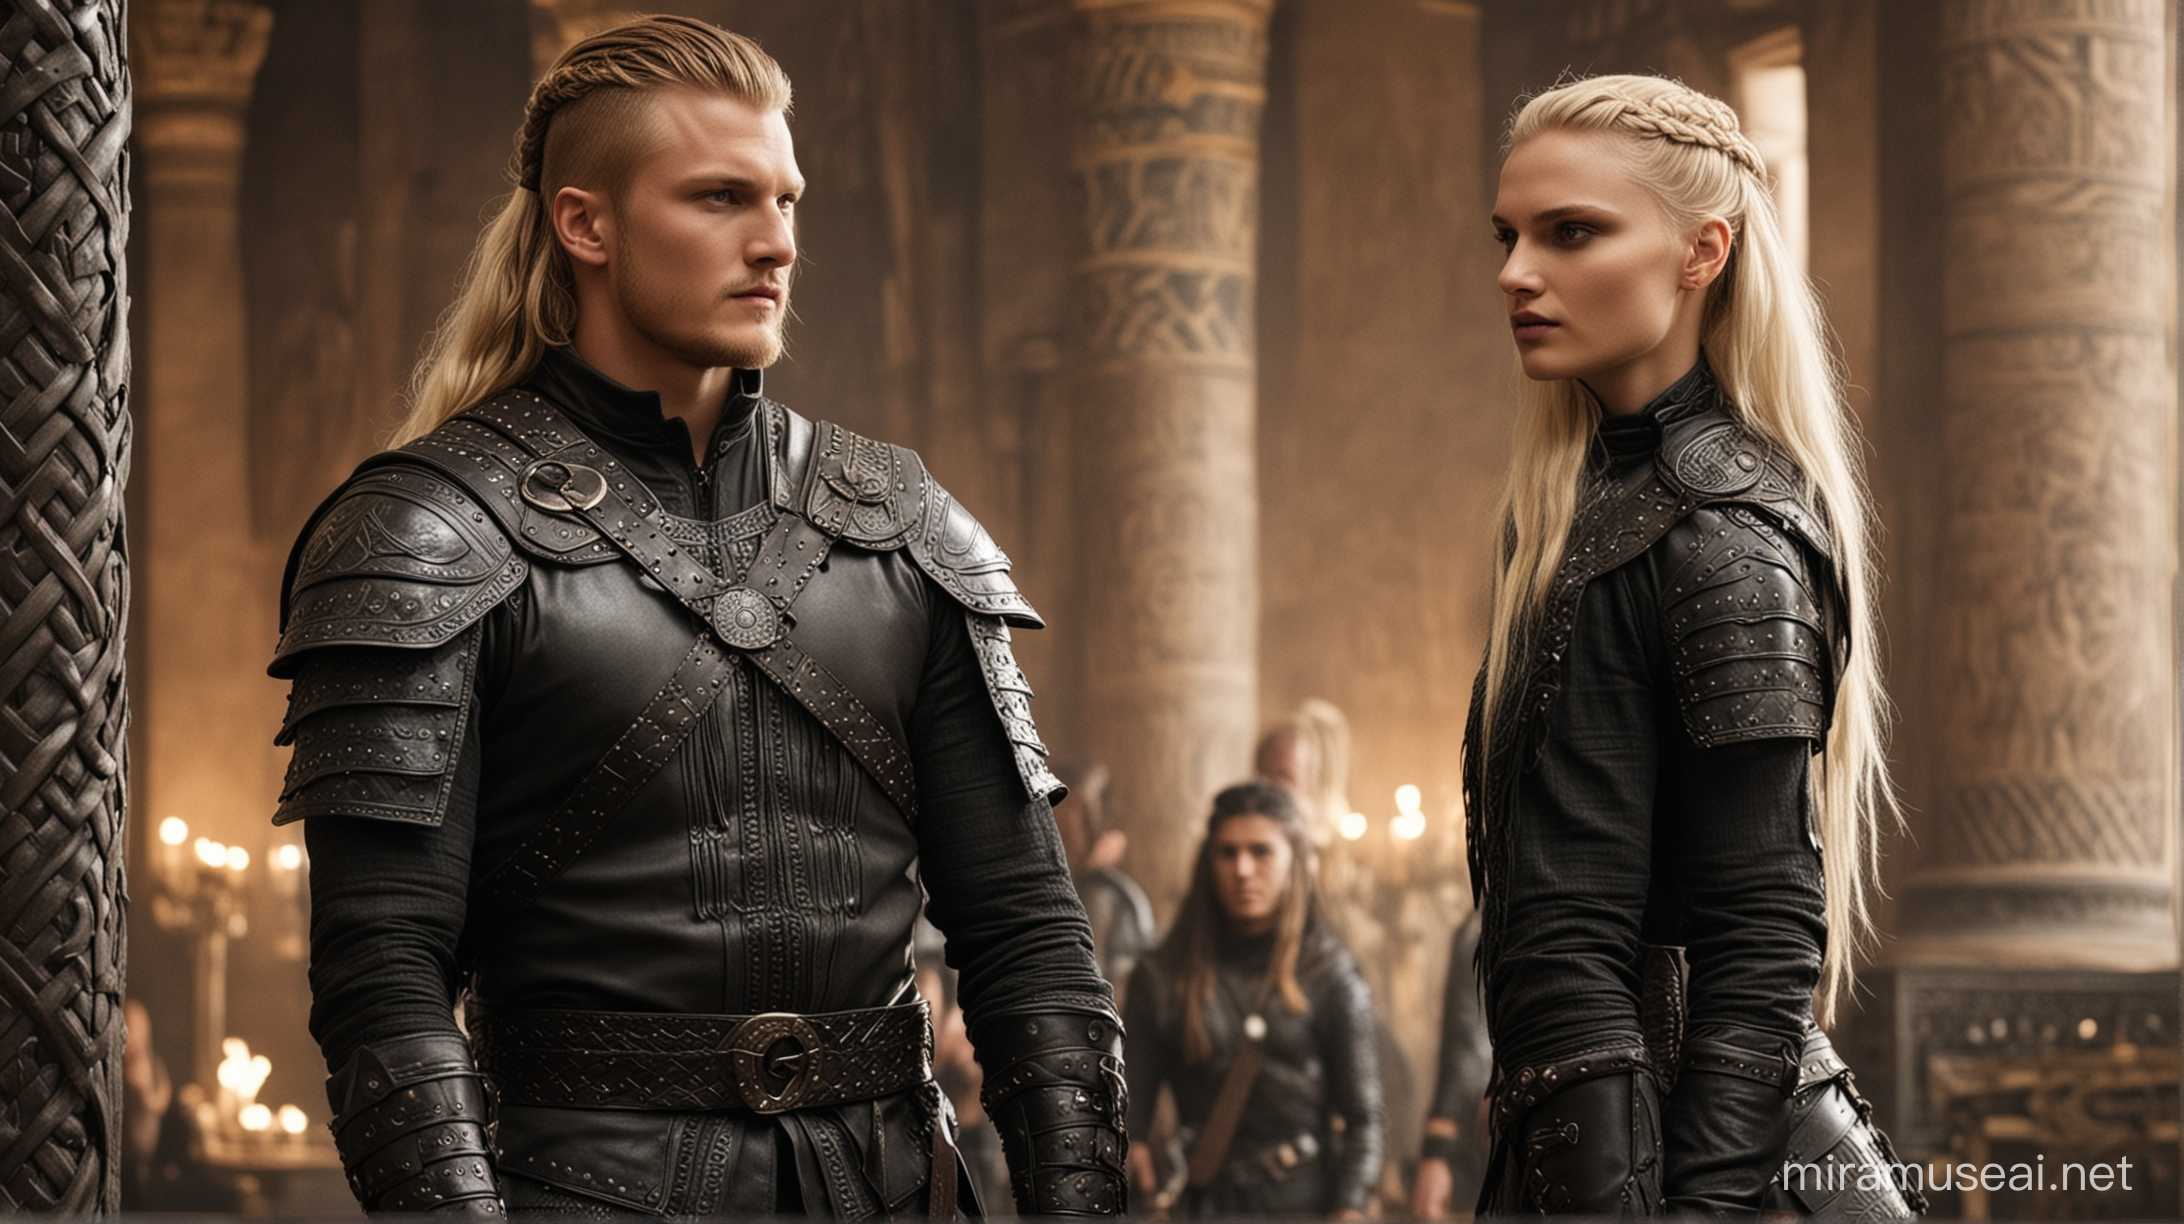 Viking brothers. One brother looks like Alexander Ludwig, the other looks like a beautiful boy Andrej pejic. They are in black leather armour with their hair in war braids, standing in a Egyptian throne room.